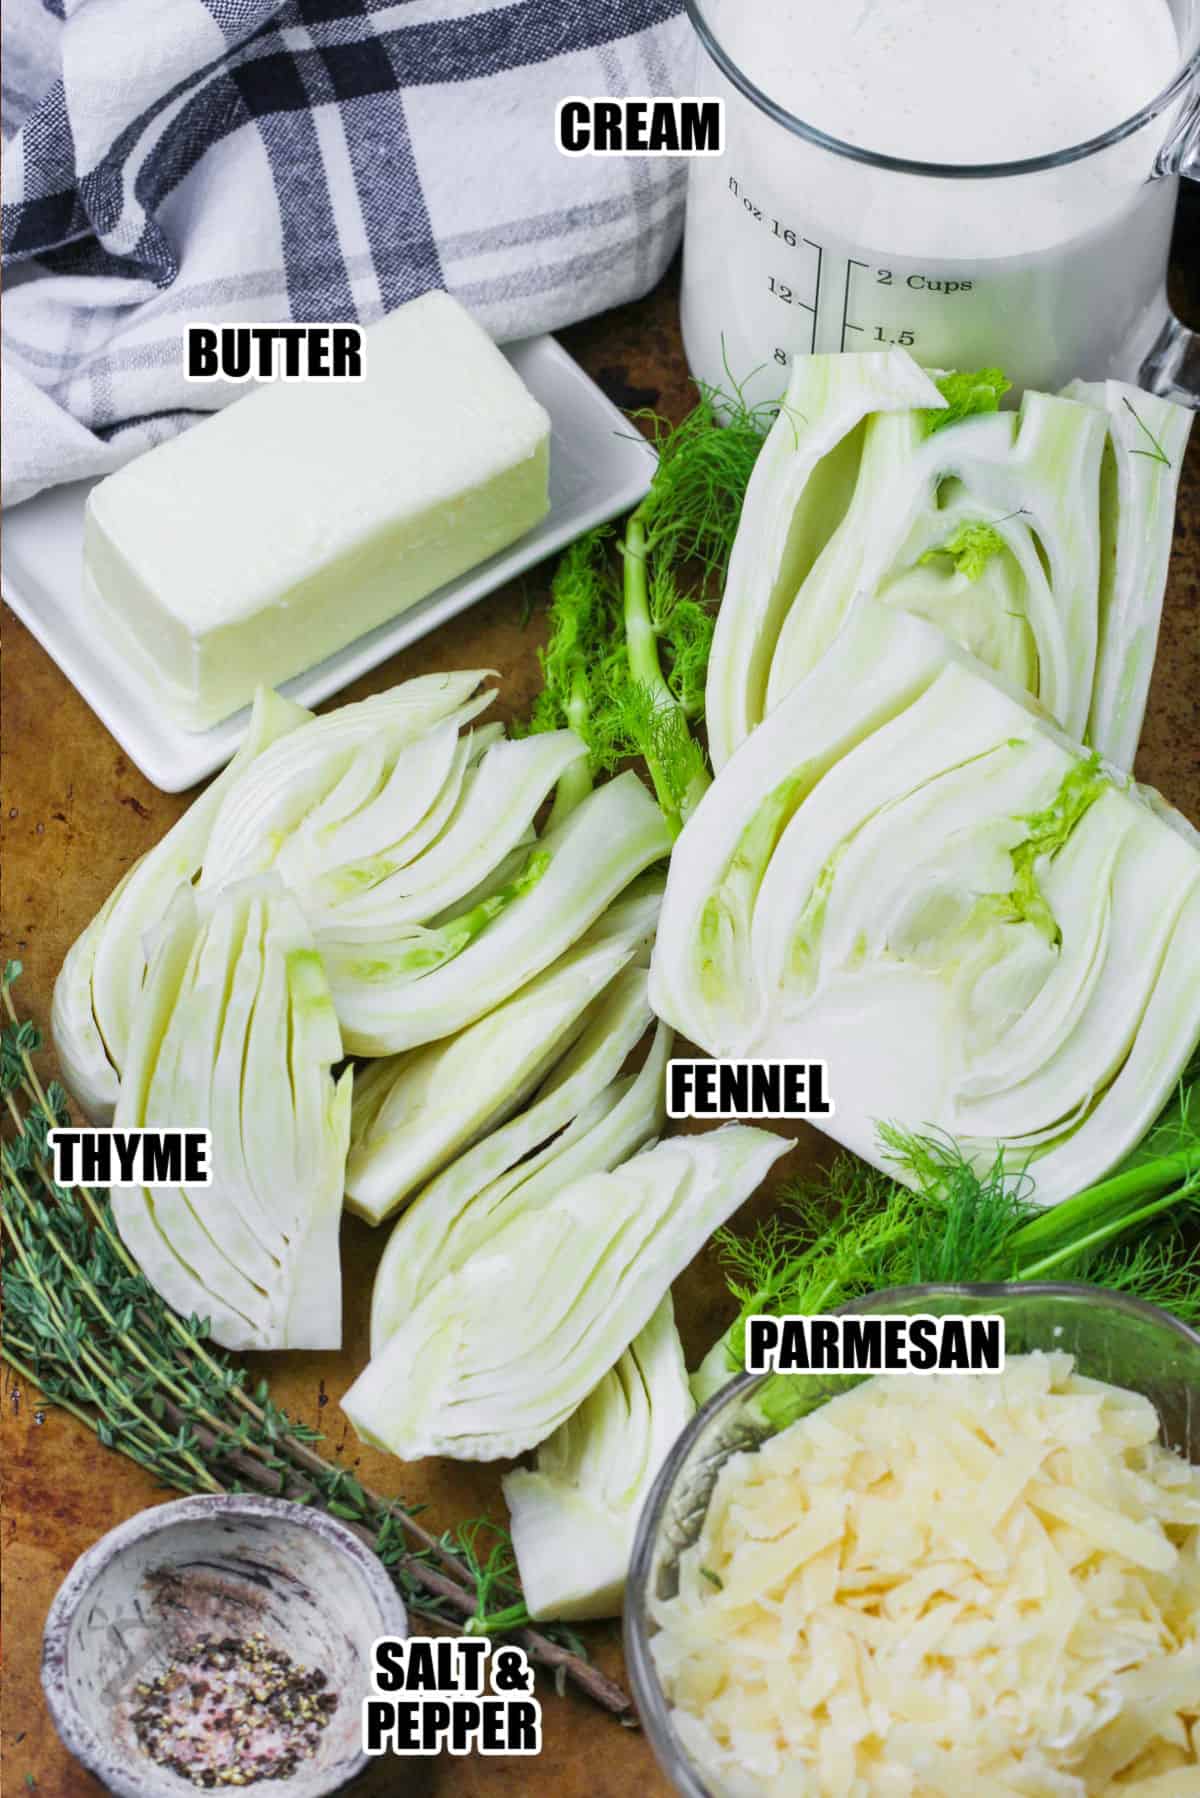 cream , butter , fennel , parmesan , thyme and seasonings to make Cheesy Baked Fennel with labels